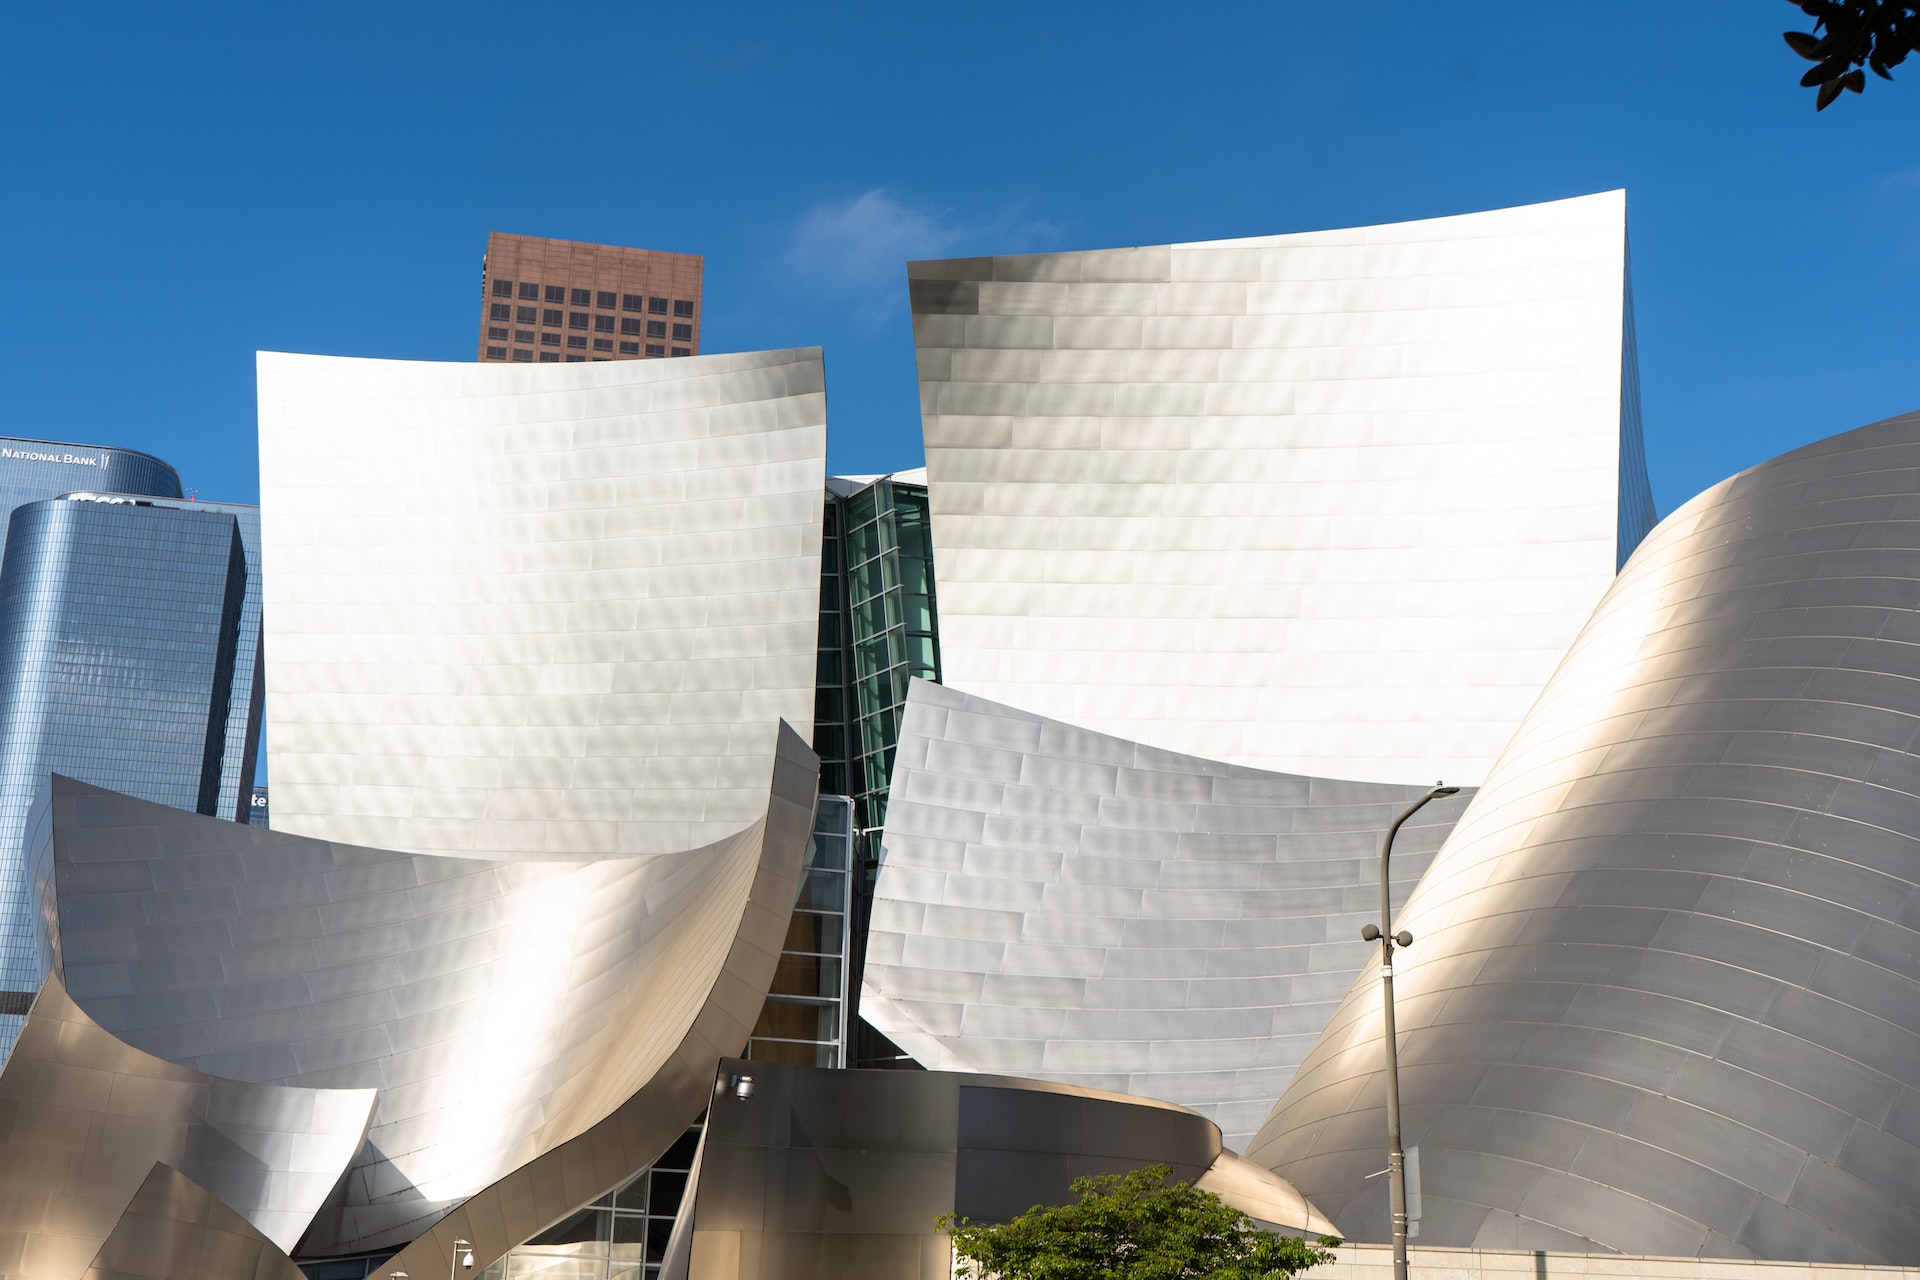 We Invite You To Meet The Best Architectural Marvels In The World